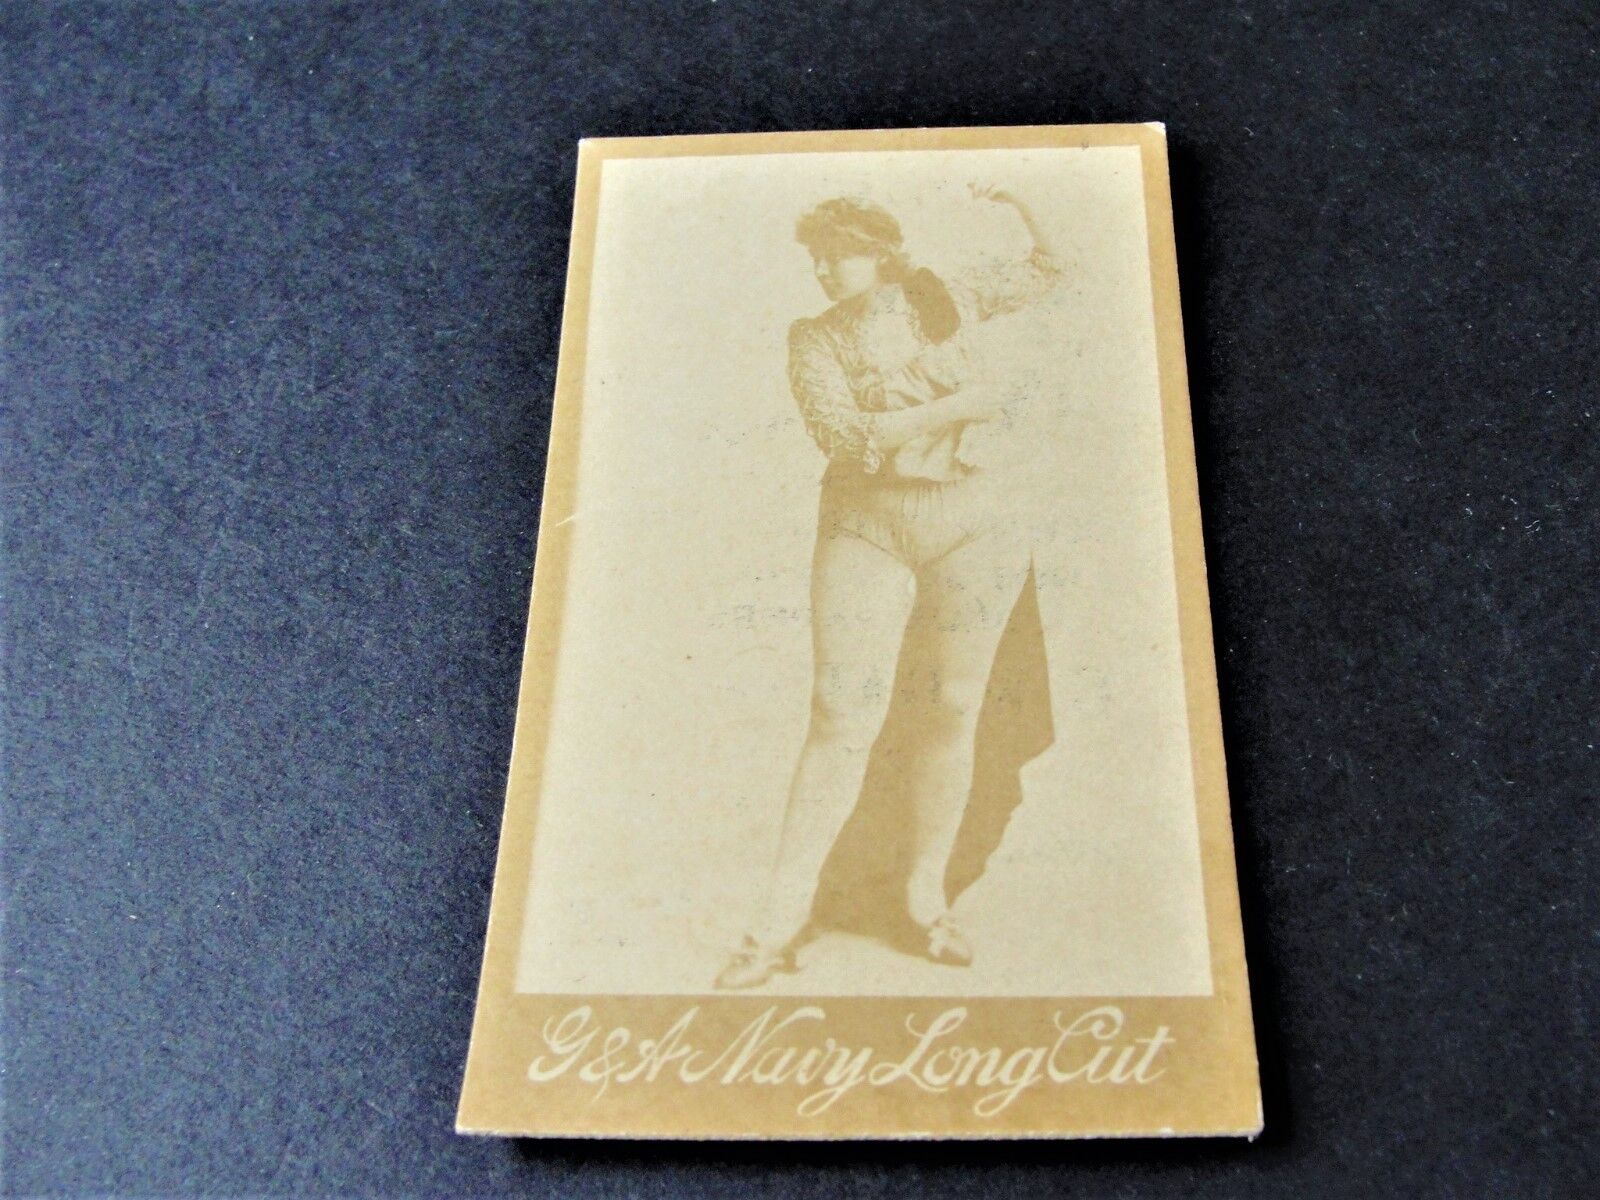  1880s G.W. Gail & Ax\'s Navy Tobacco Card with black & white image of lady. 